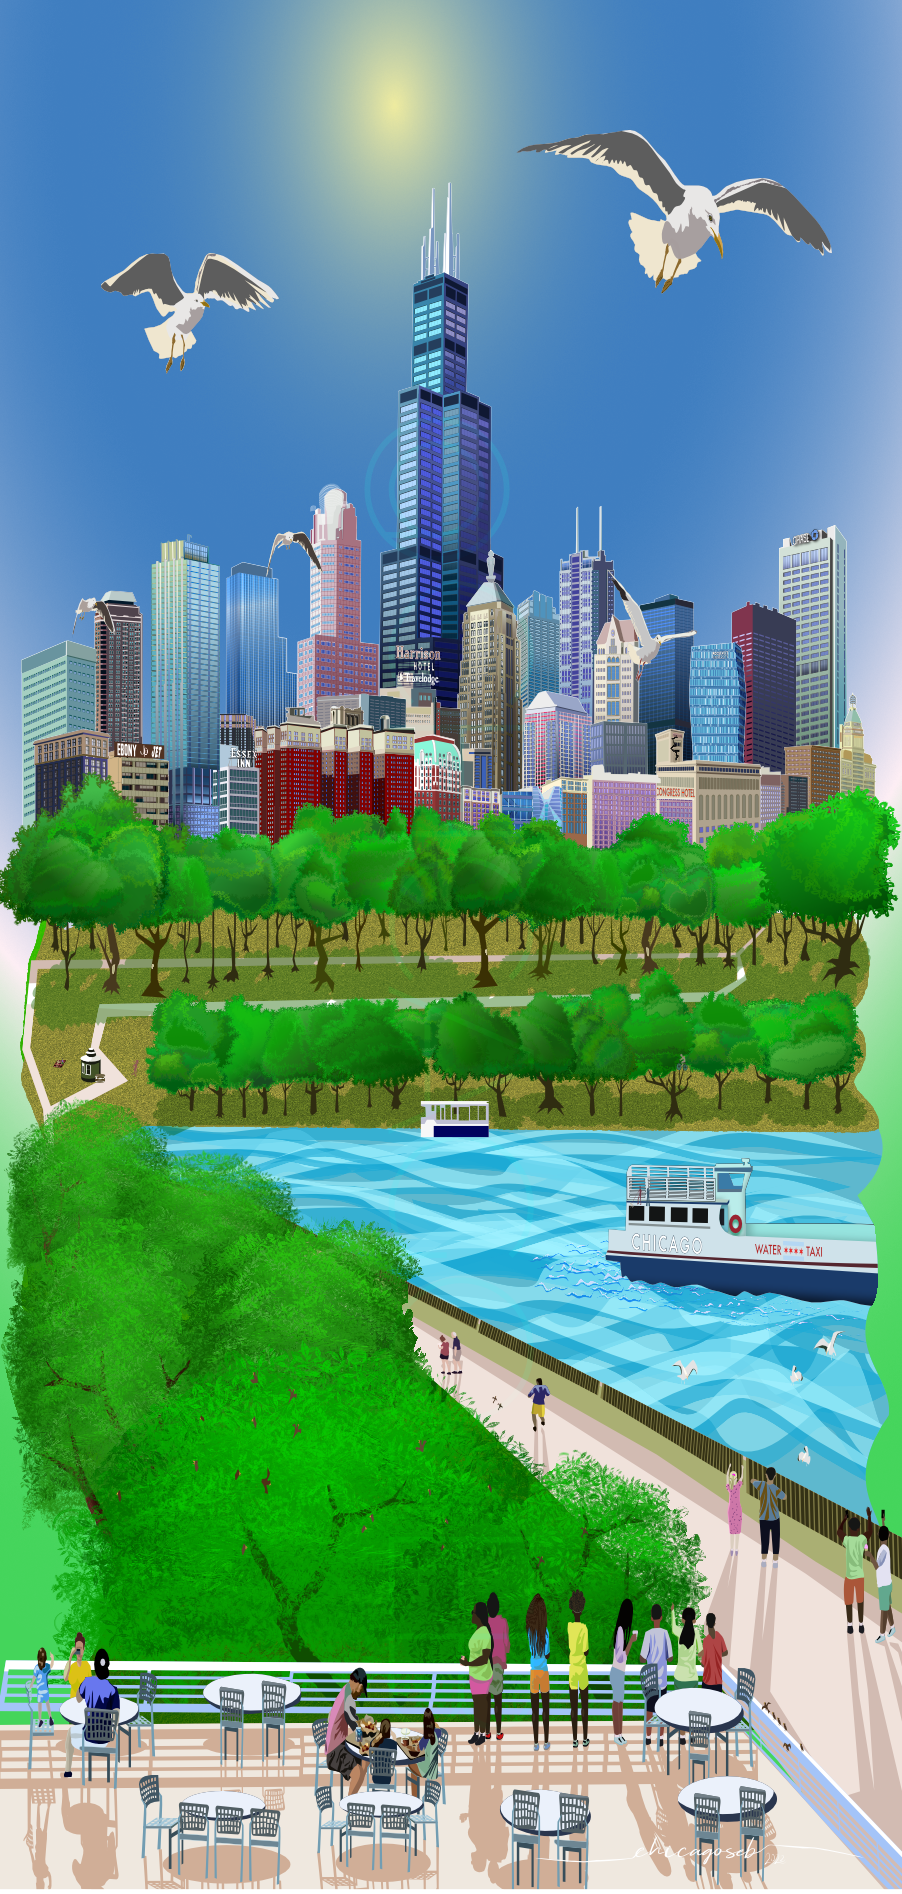 Illustration featuring Chicago as seen from the Shedd aquarium. There are seagulls flyuing overhead in the sunlight and people on the bottom enjoying the view. Part of Lake Michigan can be seen in the center along with a Chicago water taxi boat.